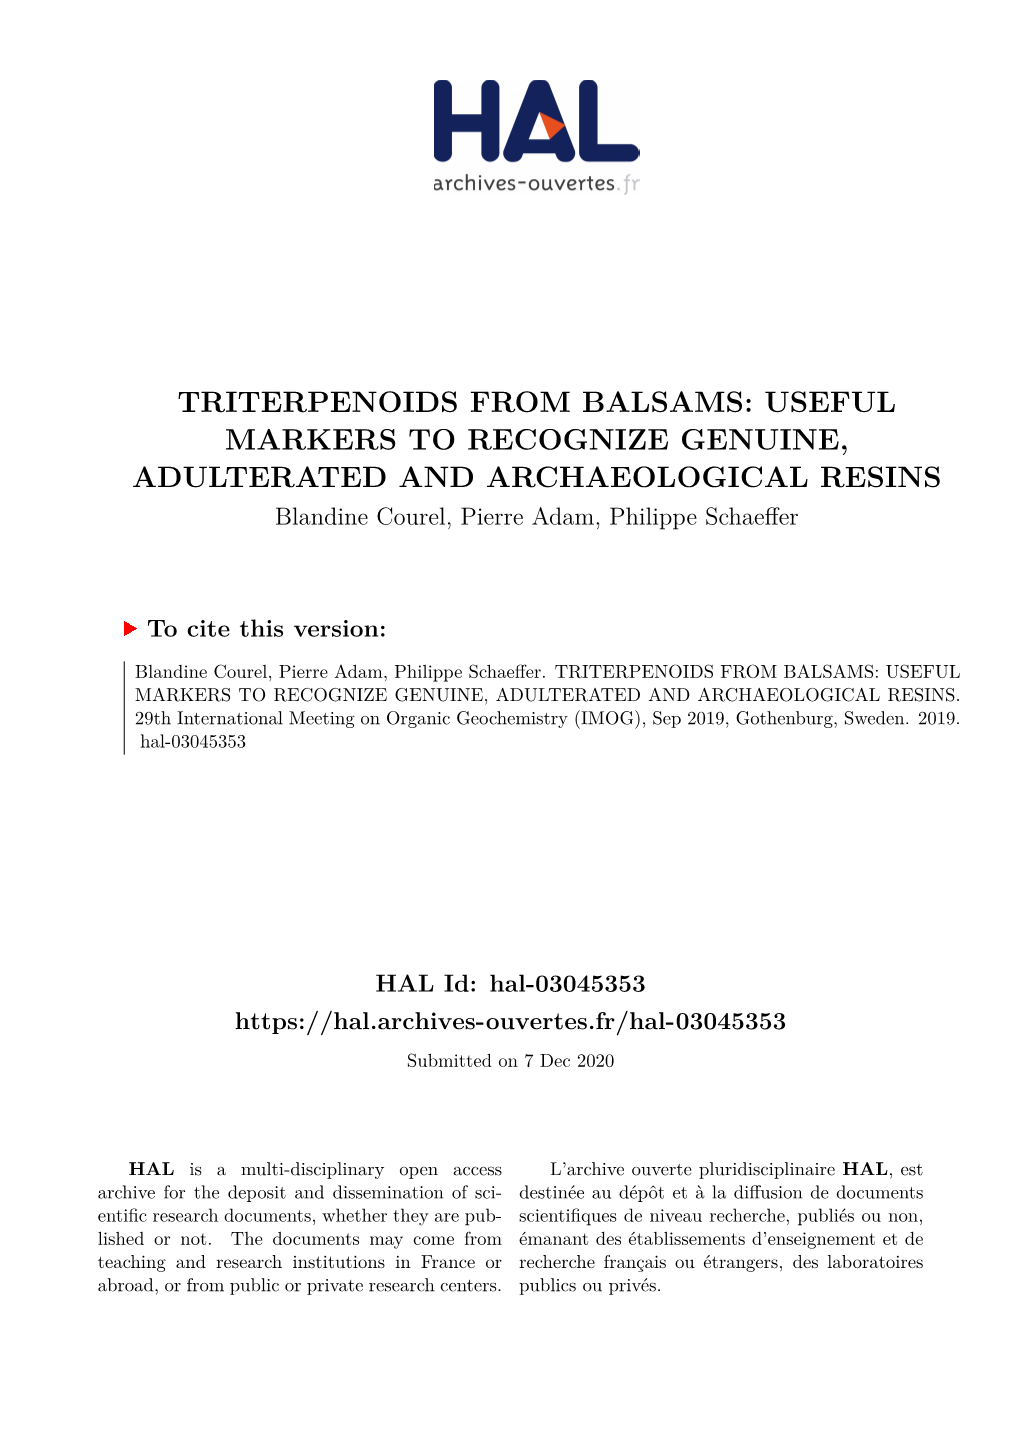 TRITERPENOIDS from BALSAMS: USEFUL MARKERS to RECOGNIZE GENUINE, ADULTERATED and ARCHAEOLOGICAL RESINS Blandine Courel, Pierre Adam, Philippe Schaeffer